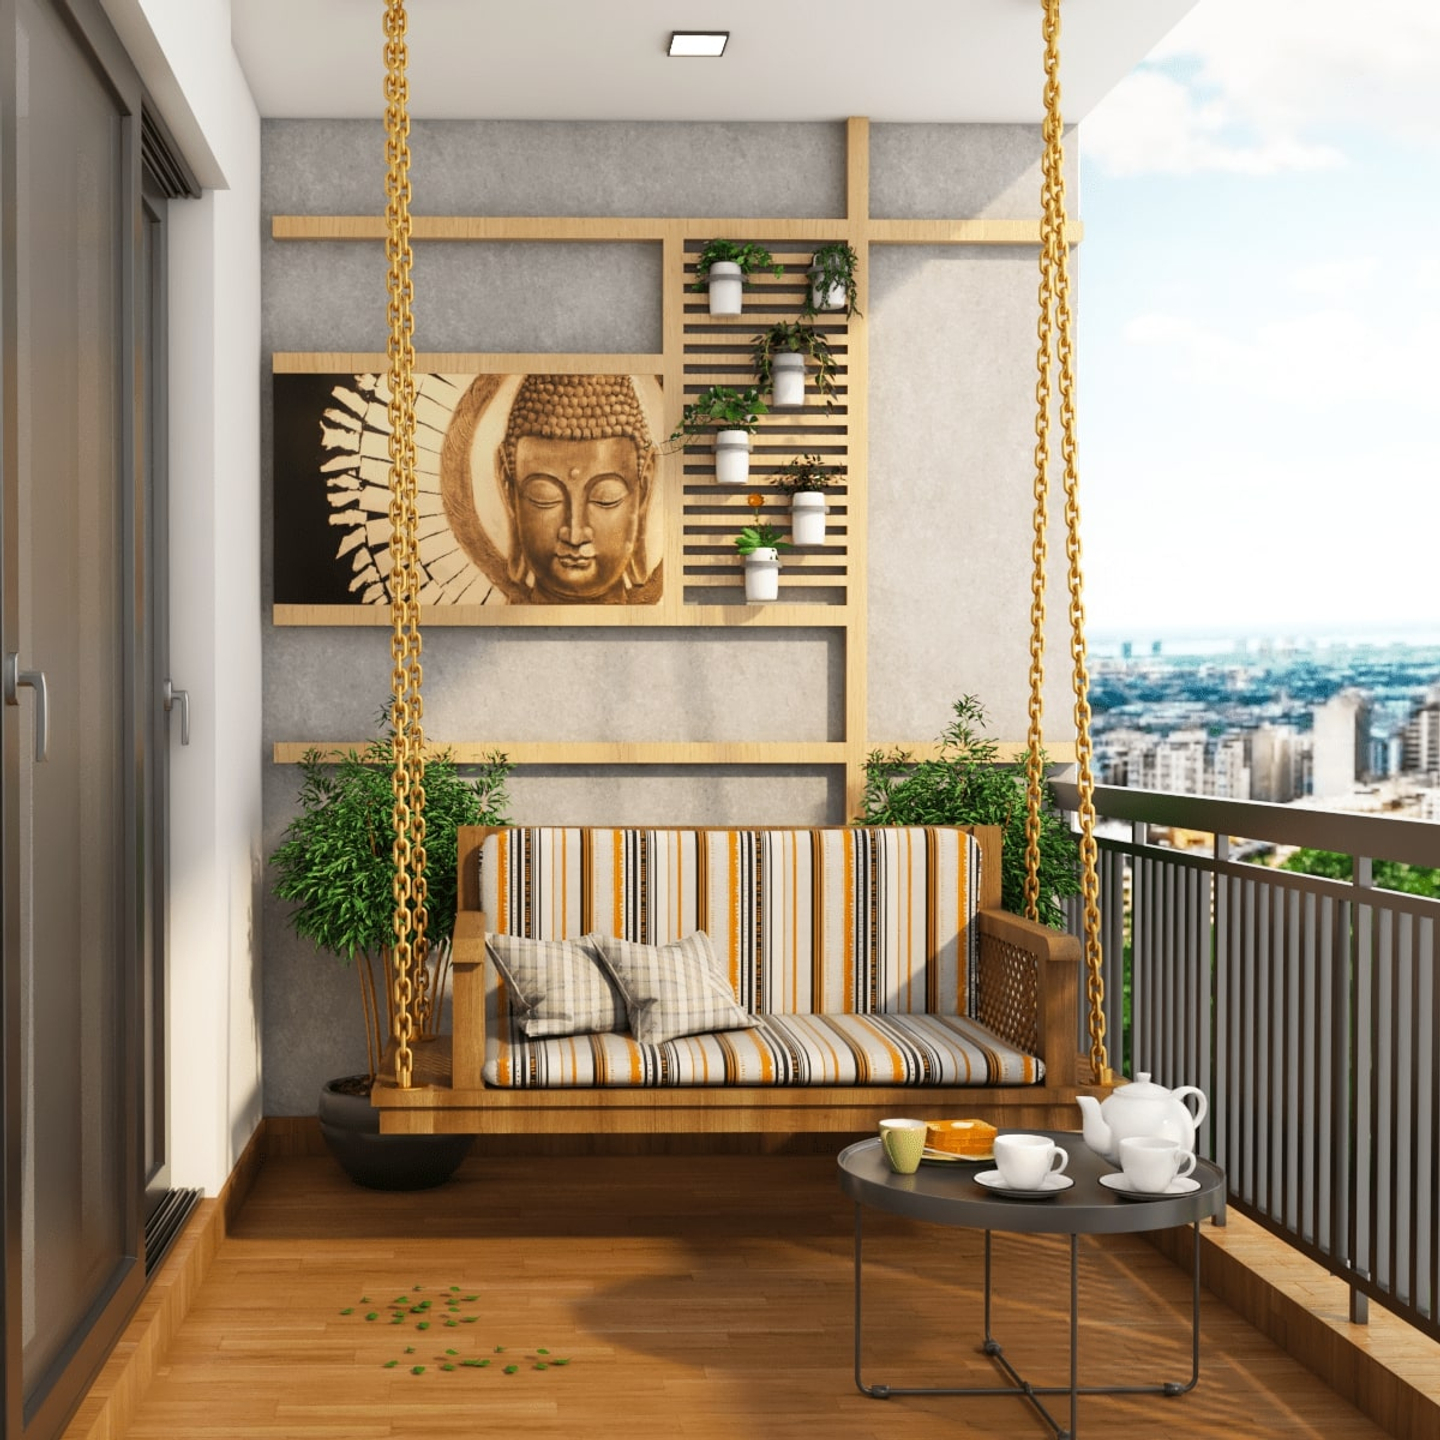 Spacious Balcony Design With Seating And Storage Options - Livspace